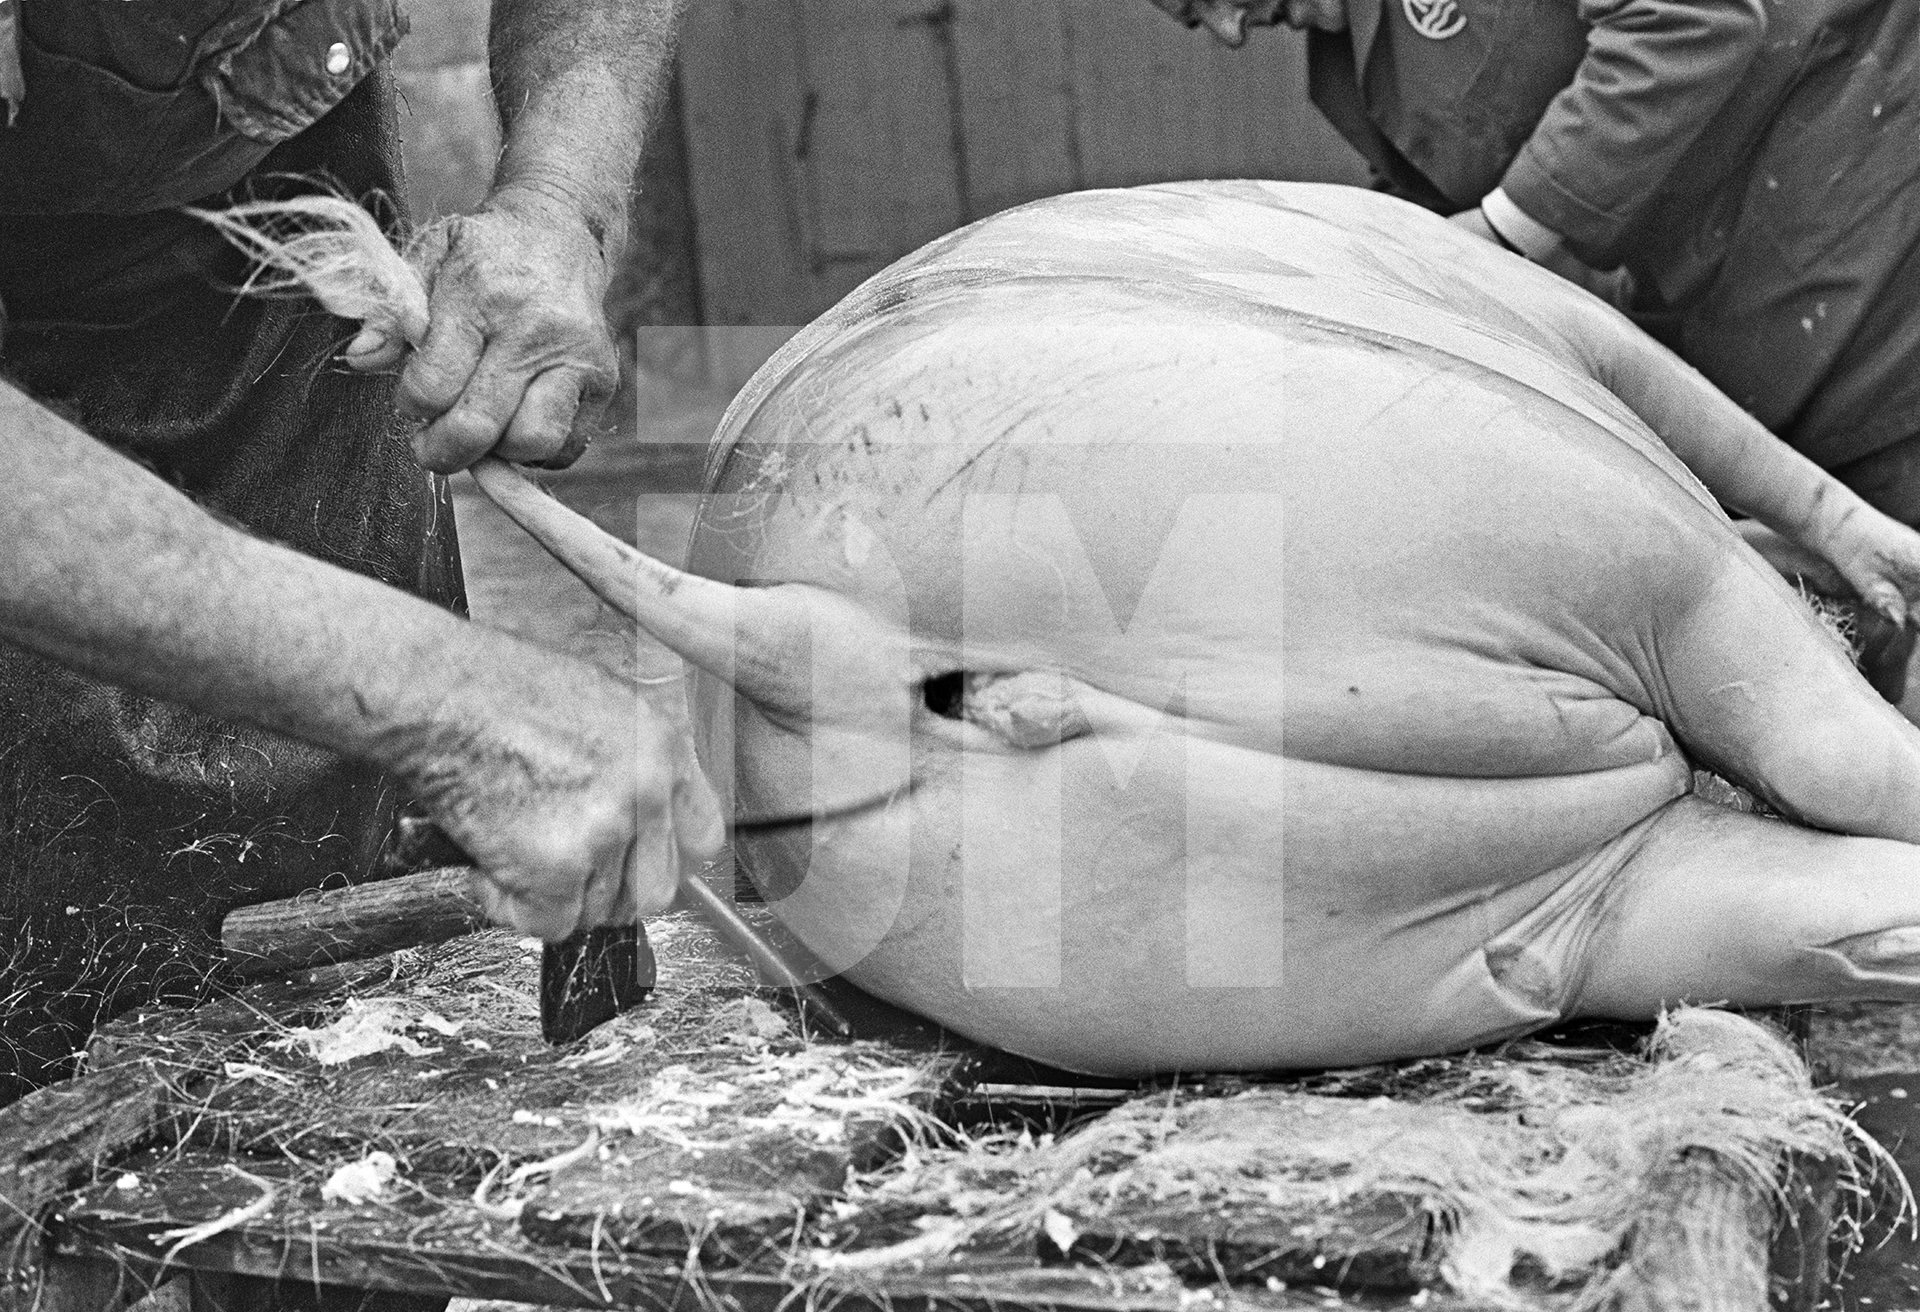 Shaving the pig. North Yorkshire 1976 by Daniel Meadows